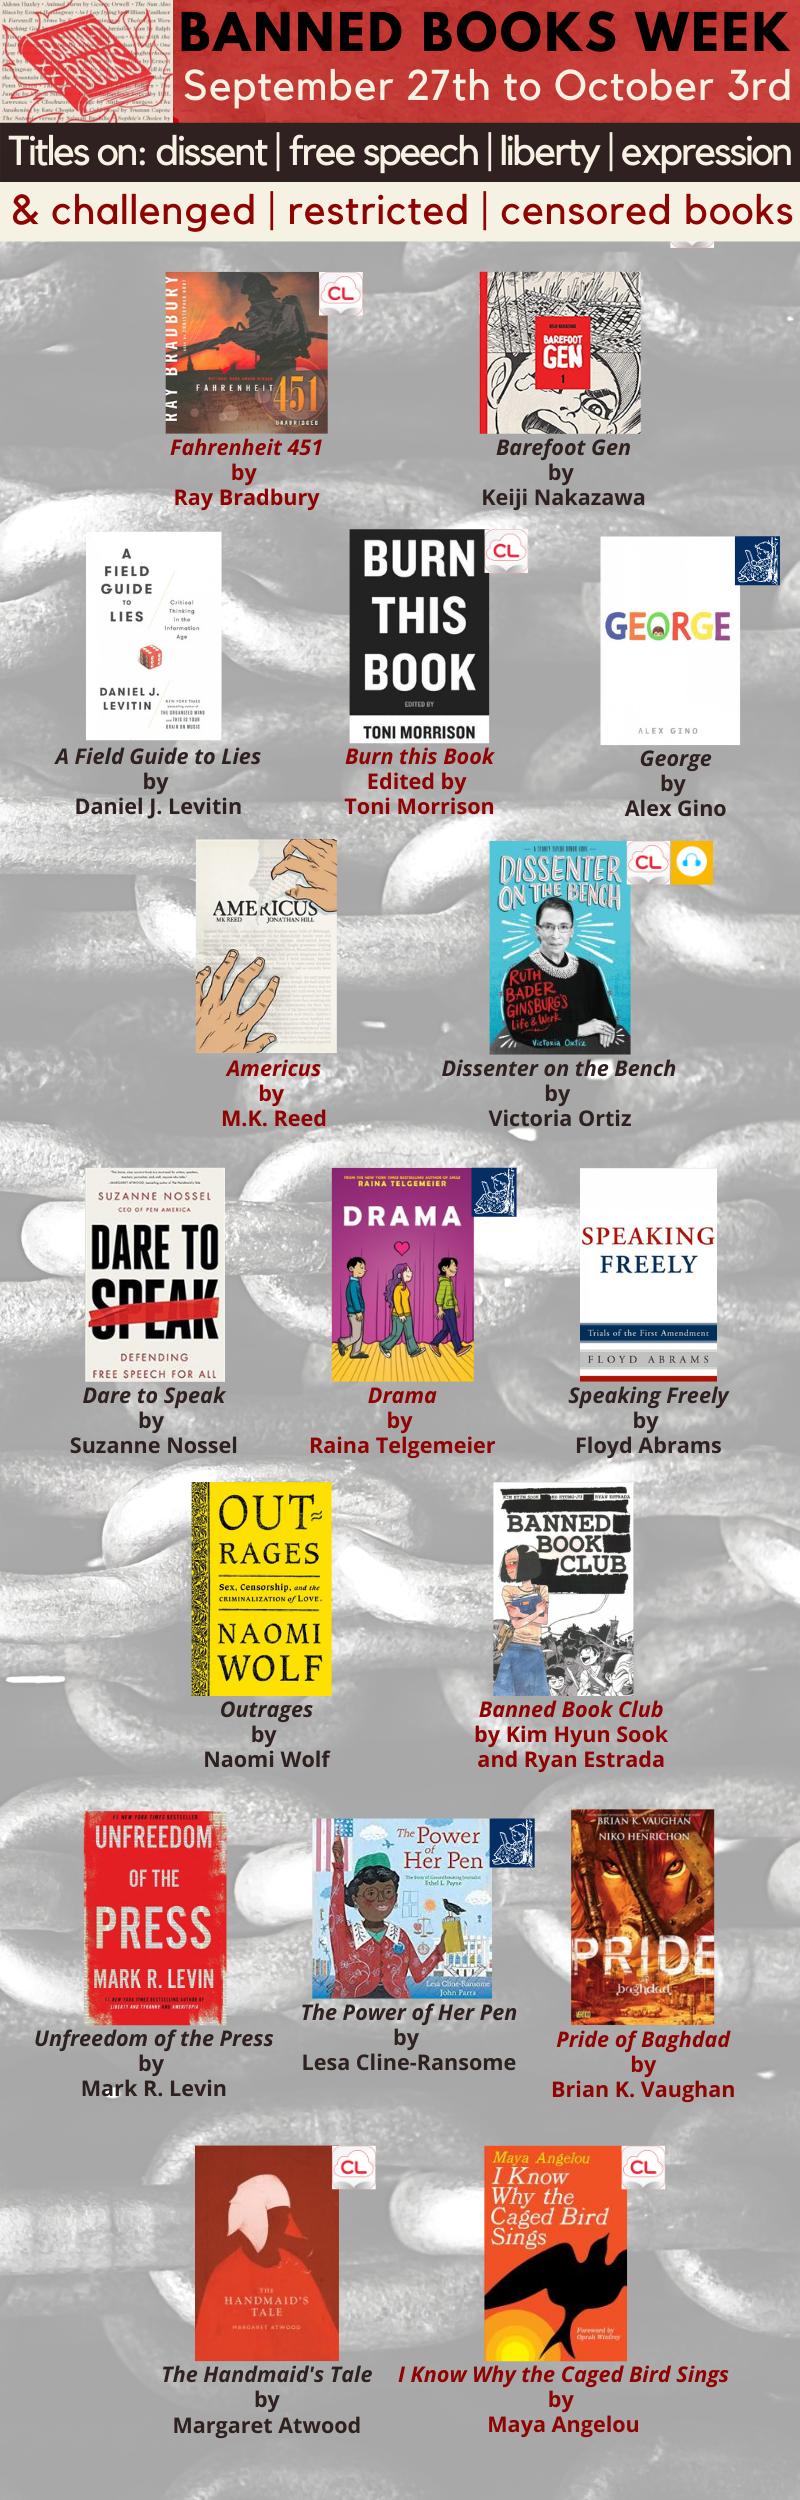 Banned Books Week September 27th-October 3rd: Titles on dissent, free speech, liberty, expression